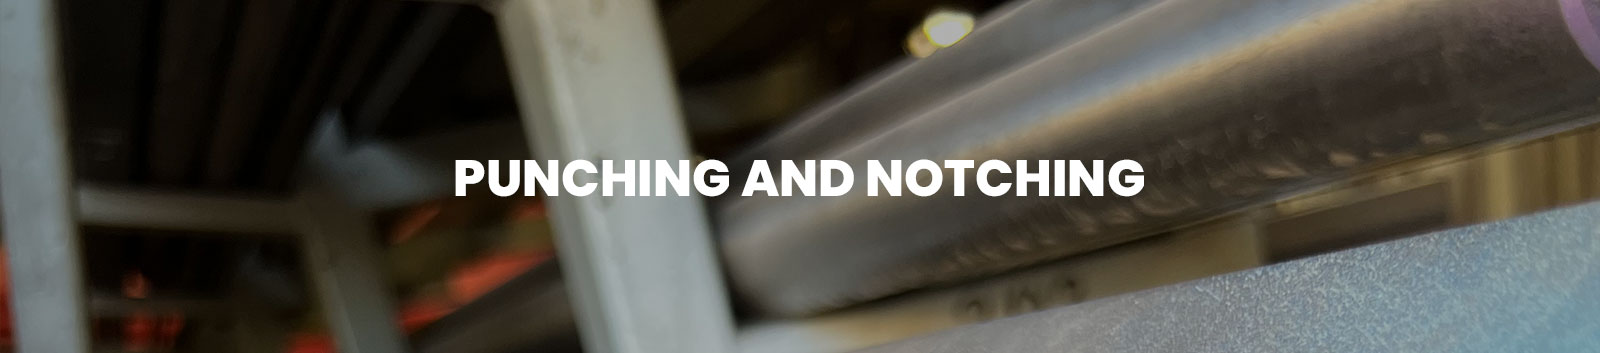 Metal Punching and Notching Services